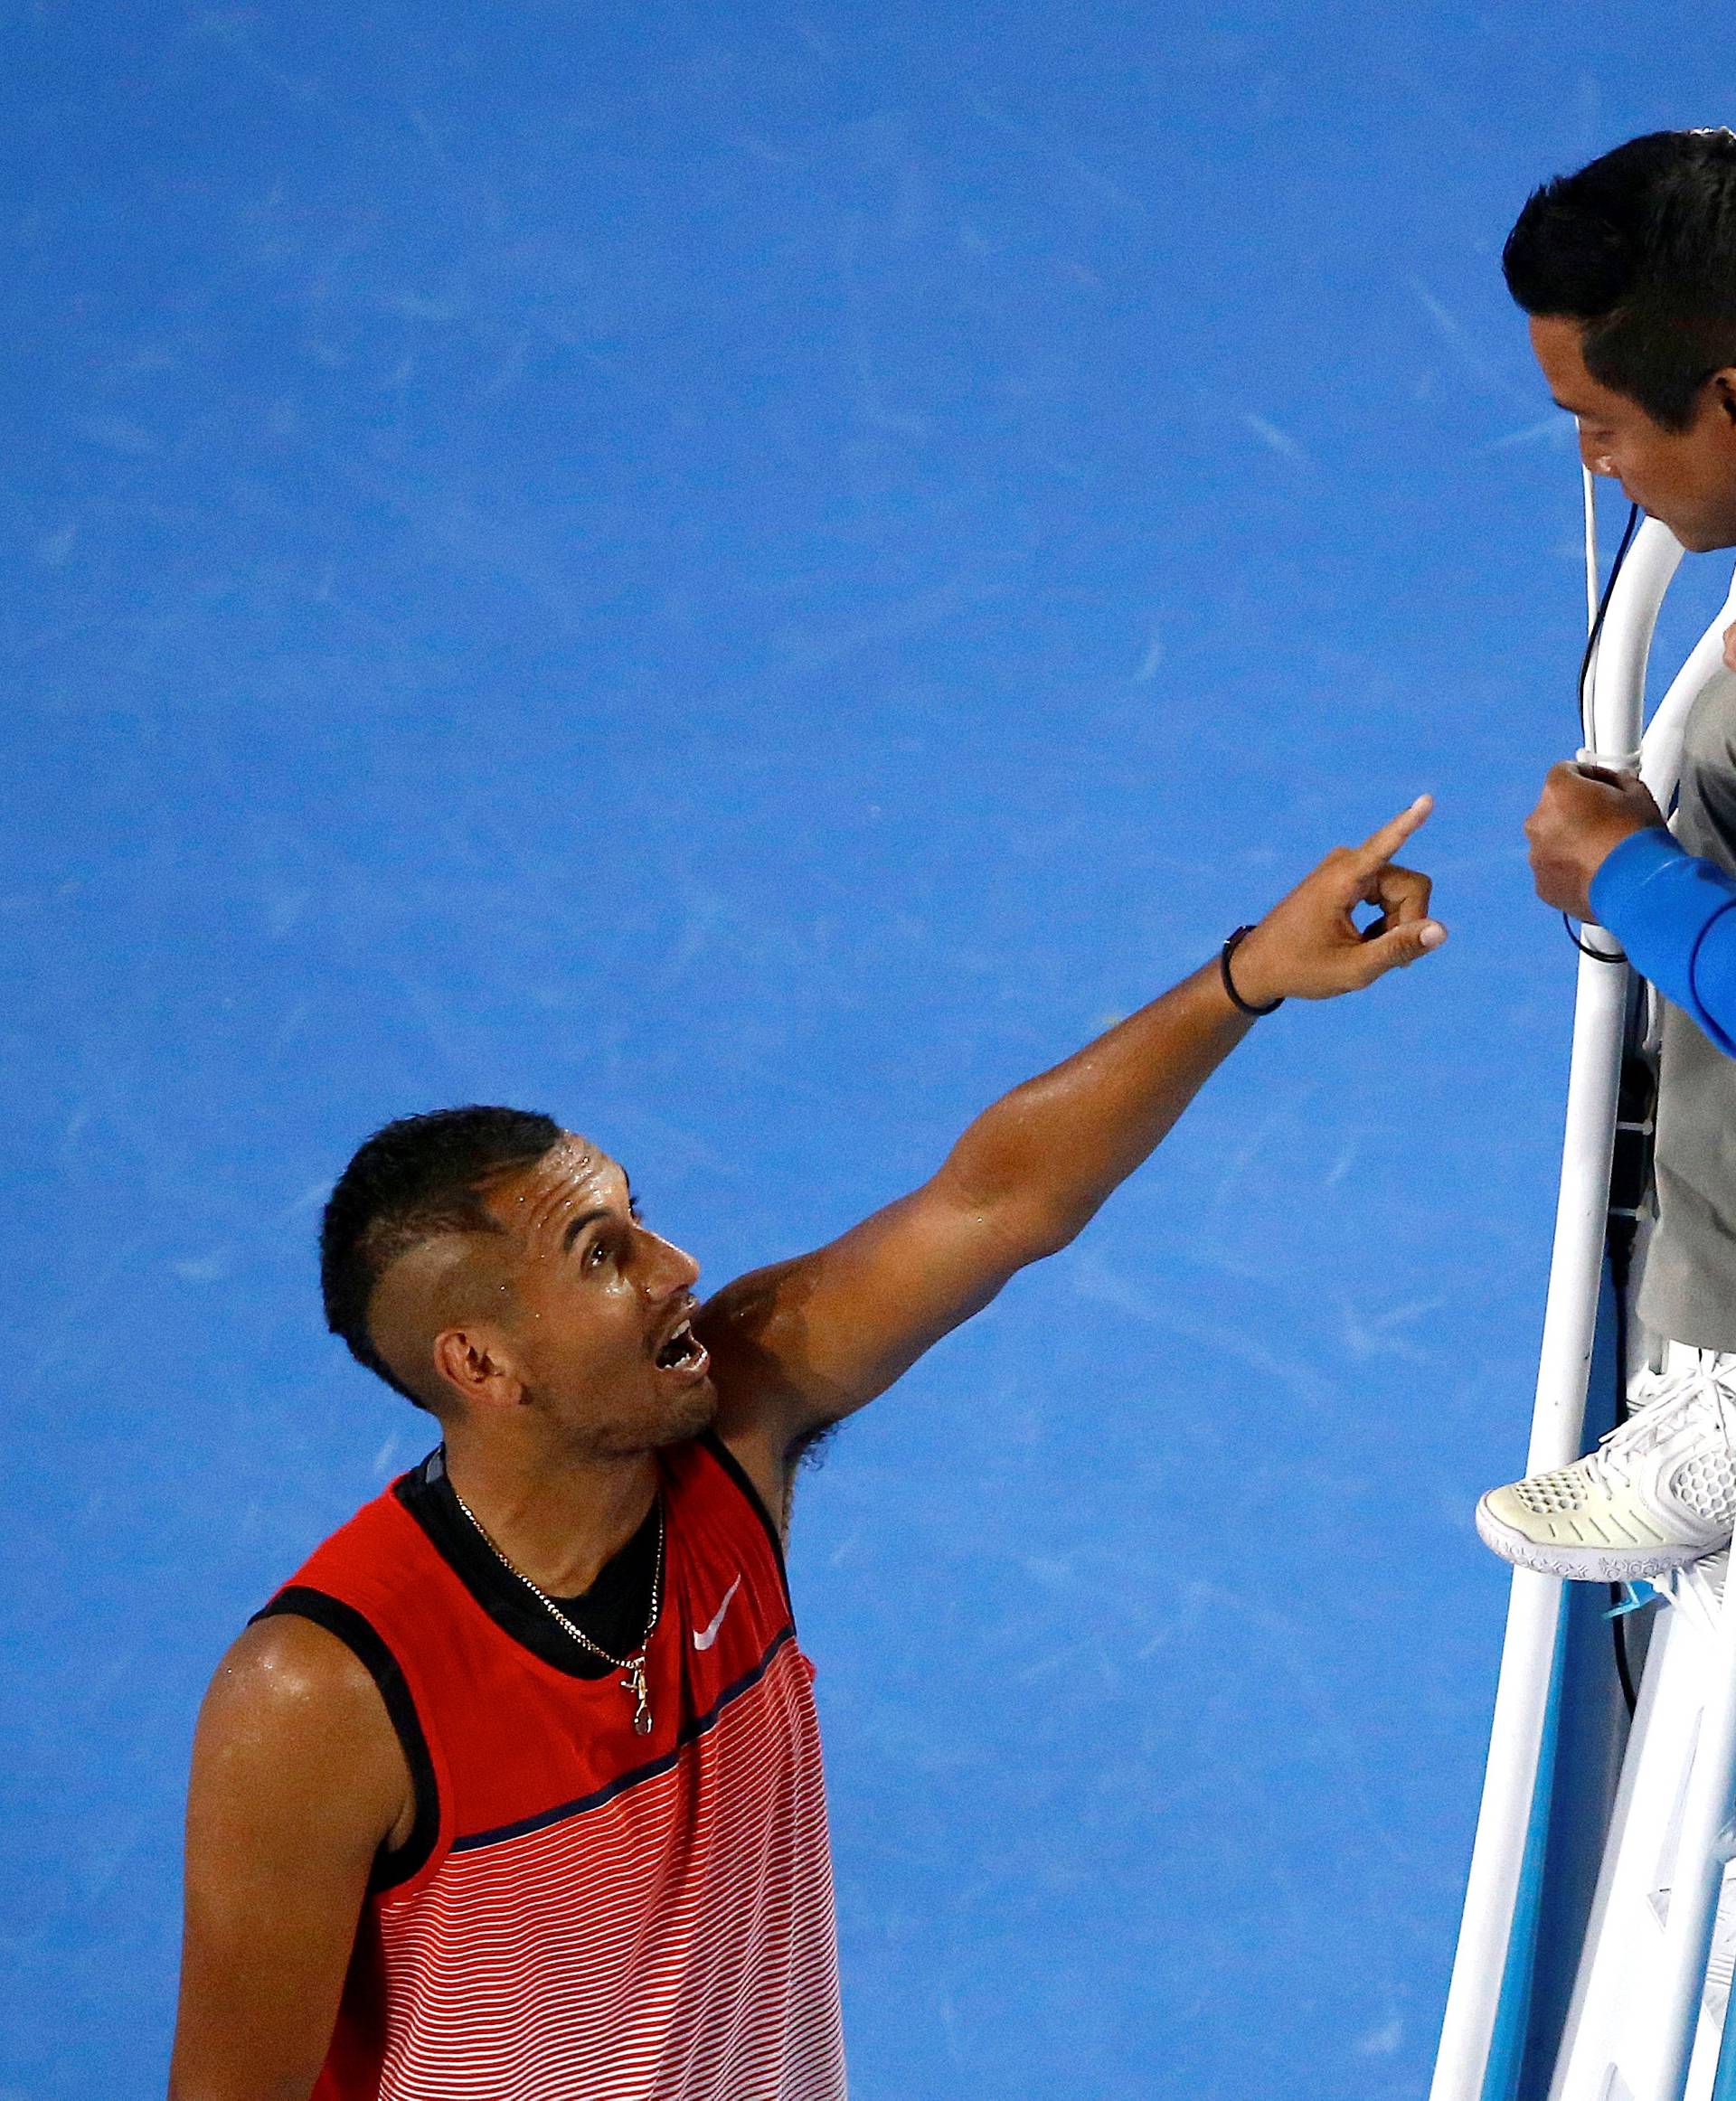 Australia's Kyrgios points at umpire Keothavong as they speak during his third round match against Czech Republic's Berdych at the Australian Open tennis tournament at Melbourne Park